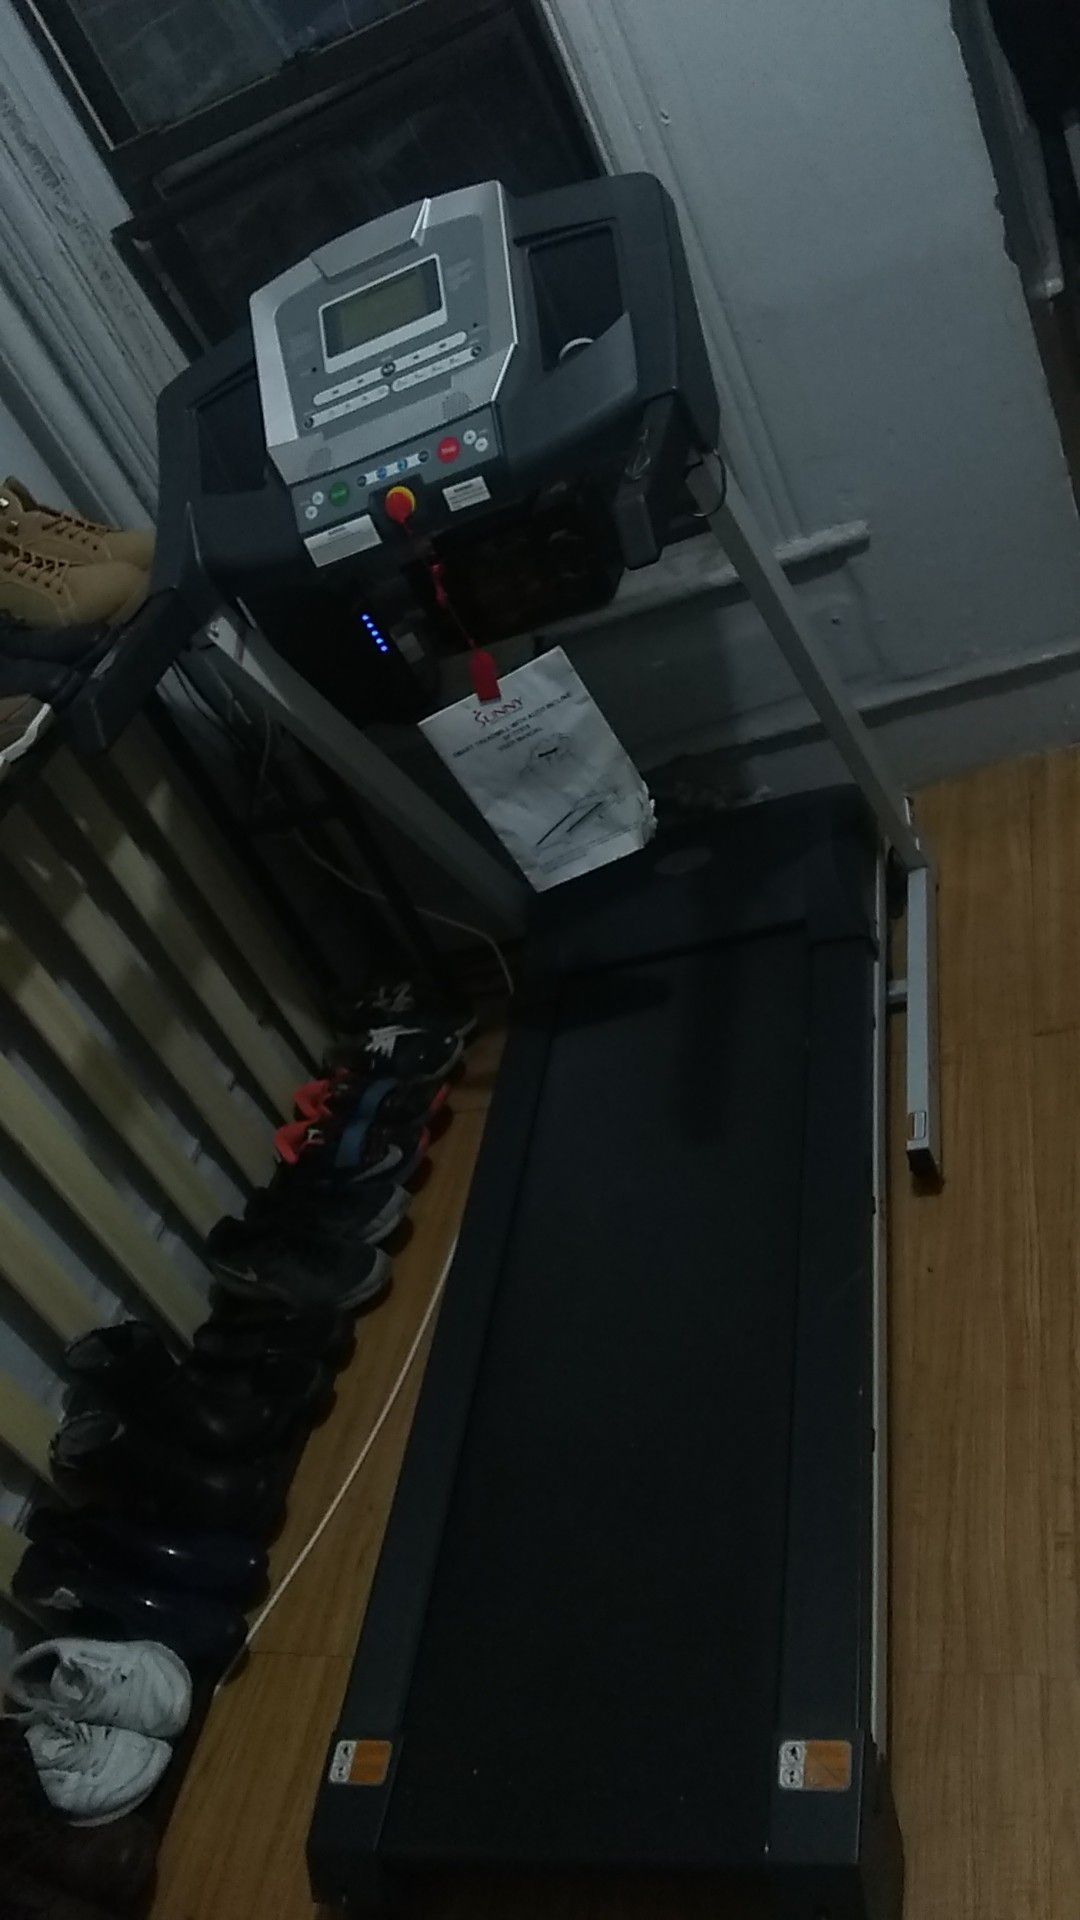 Foldable smart treadmill with incline